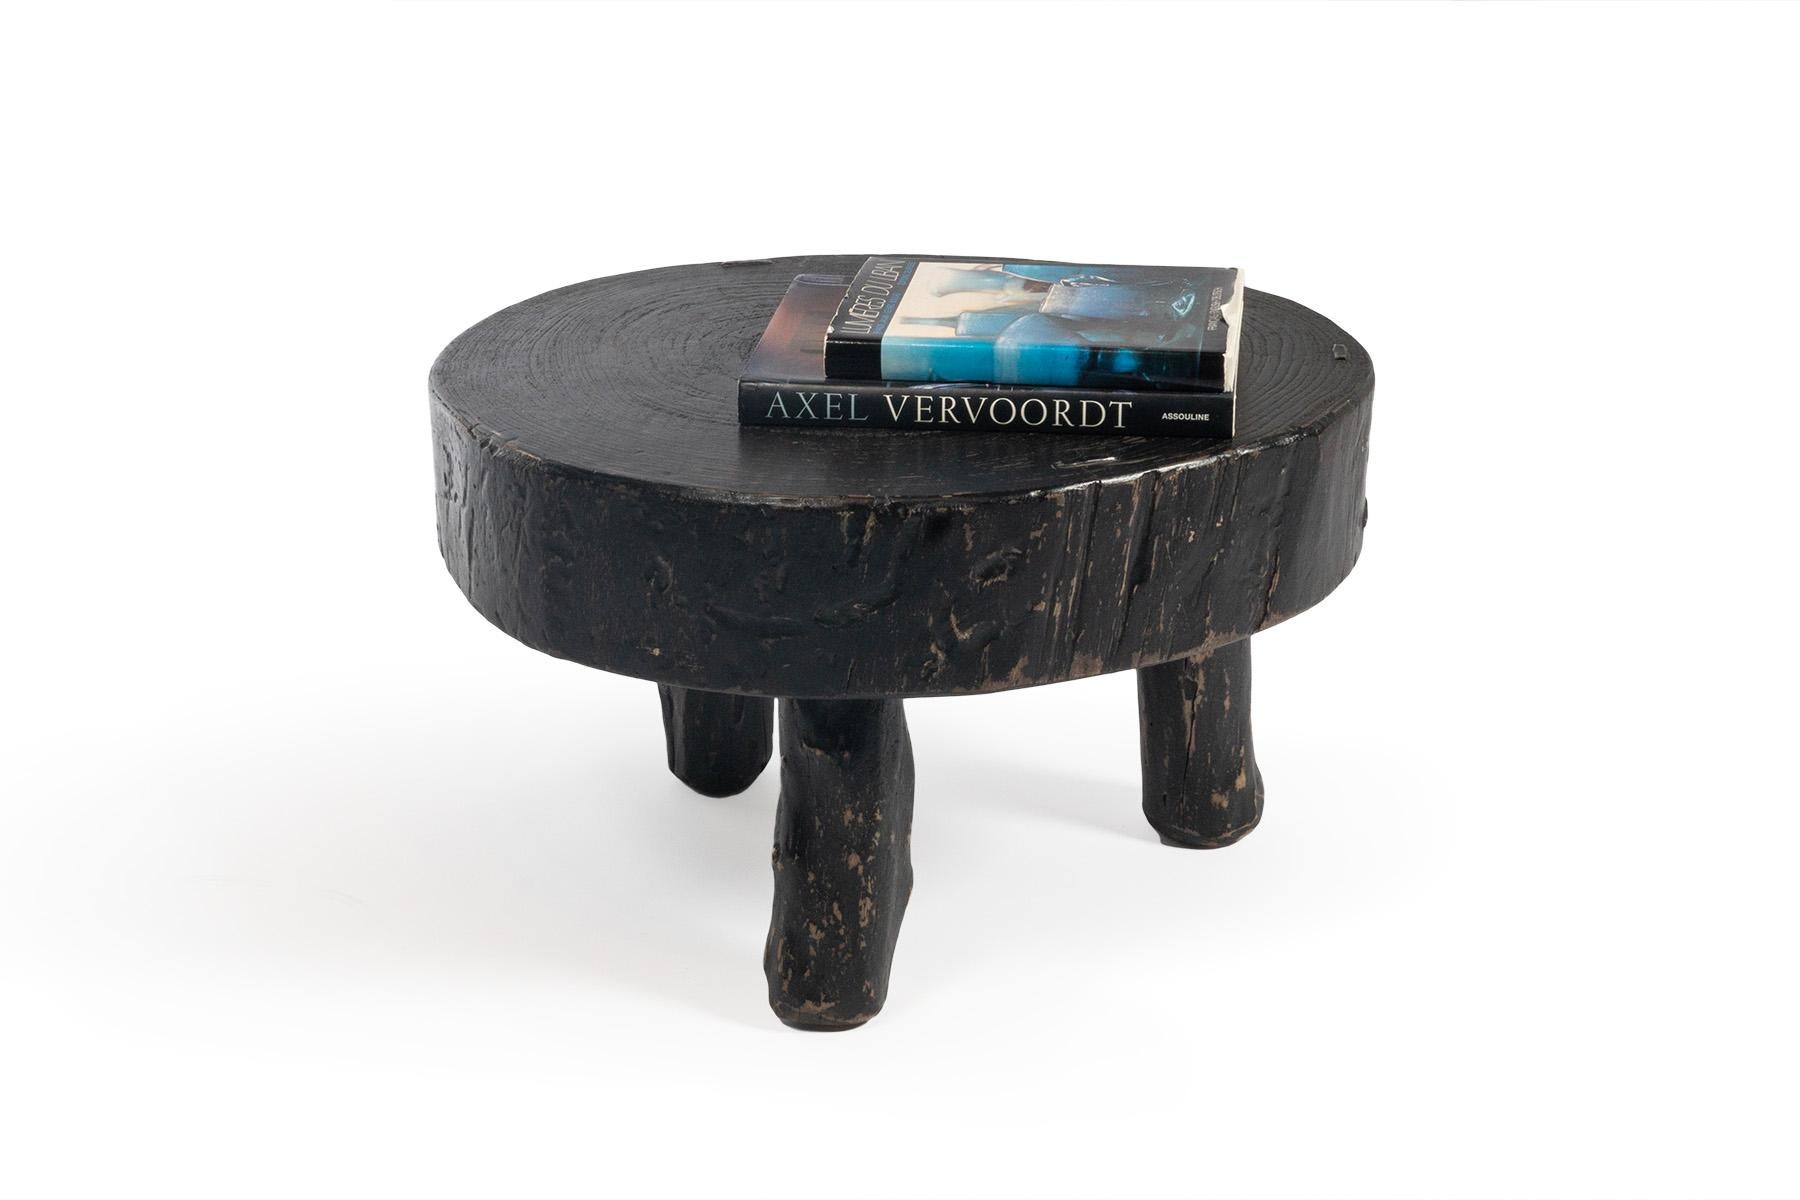 This elm block coffee table features a beautiful distressed ebonized finish and cleat details. Style individually in a small seating area or with its shorter version as side tables or paired coffee tables. 

This piece is a part of Brendan Bass’s